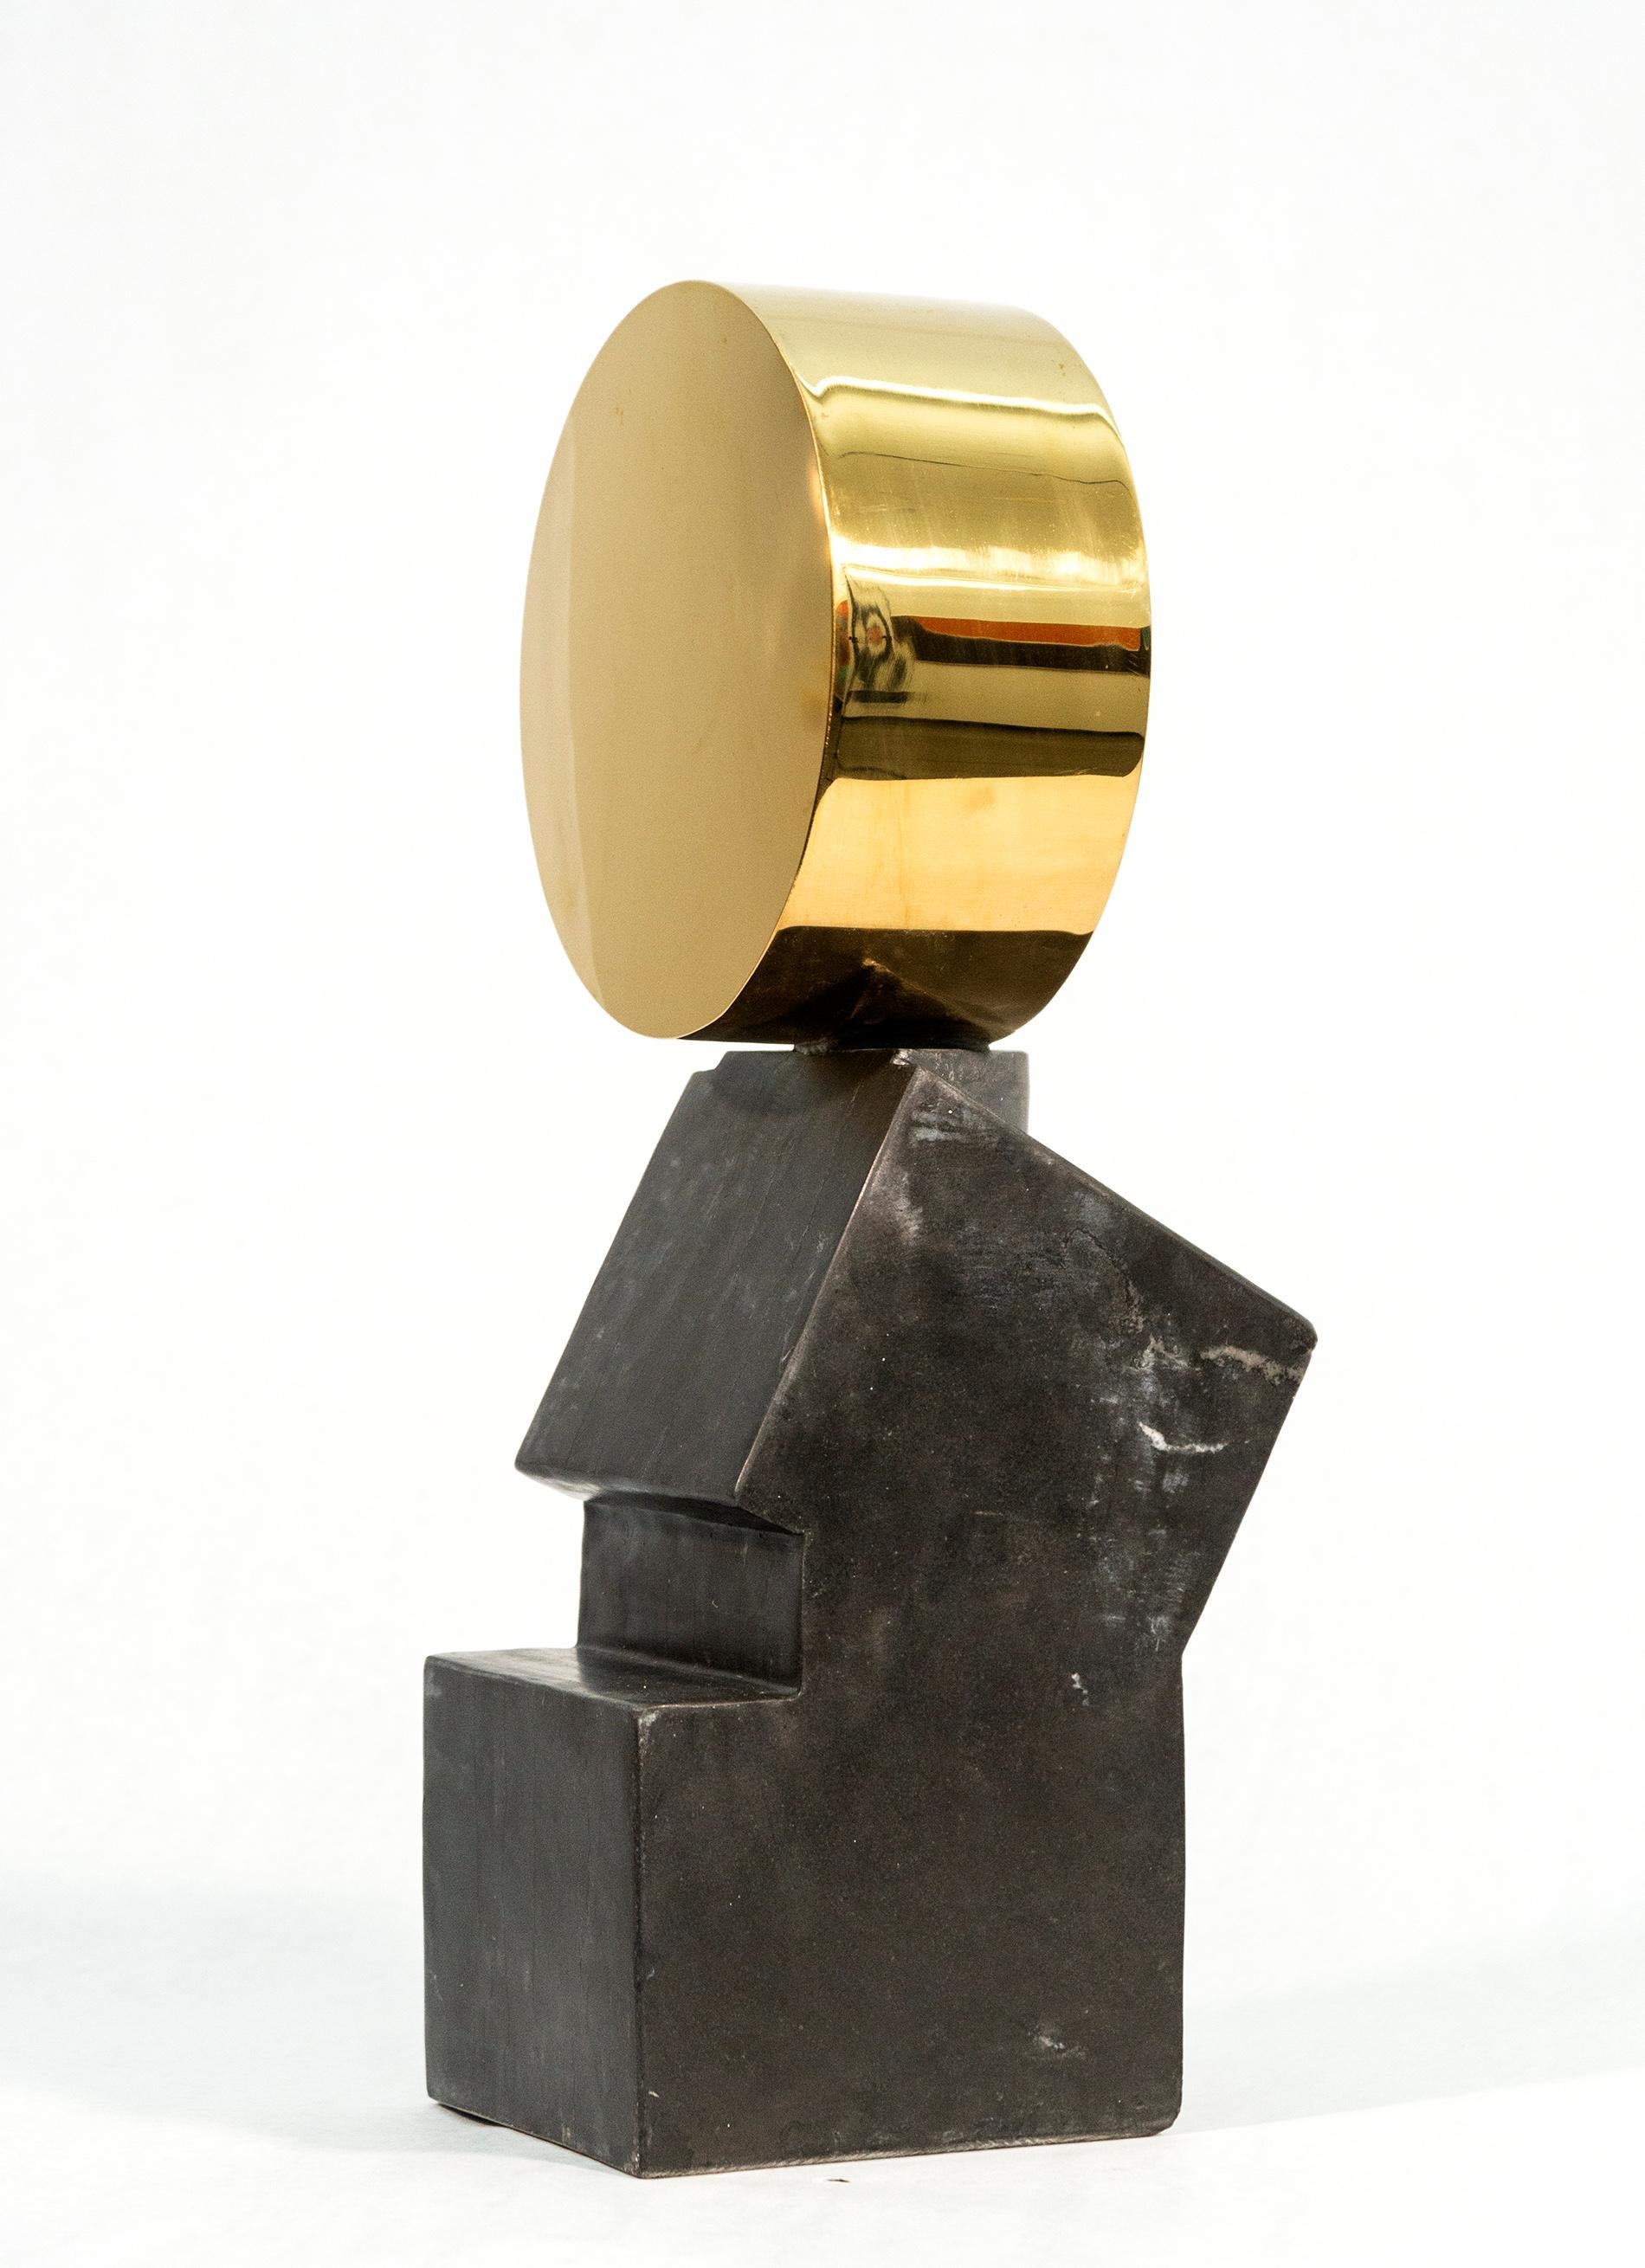 Gold Disc Marquina - contemporary, abstract, gold plated steel, marble sculpture - Sculpture by Viktor Mitic